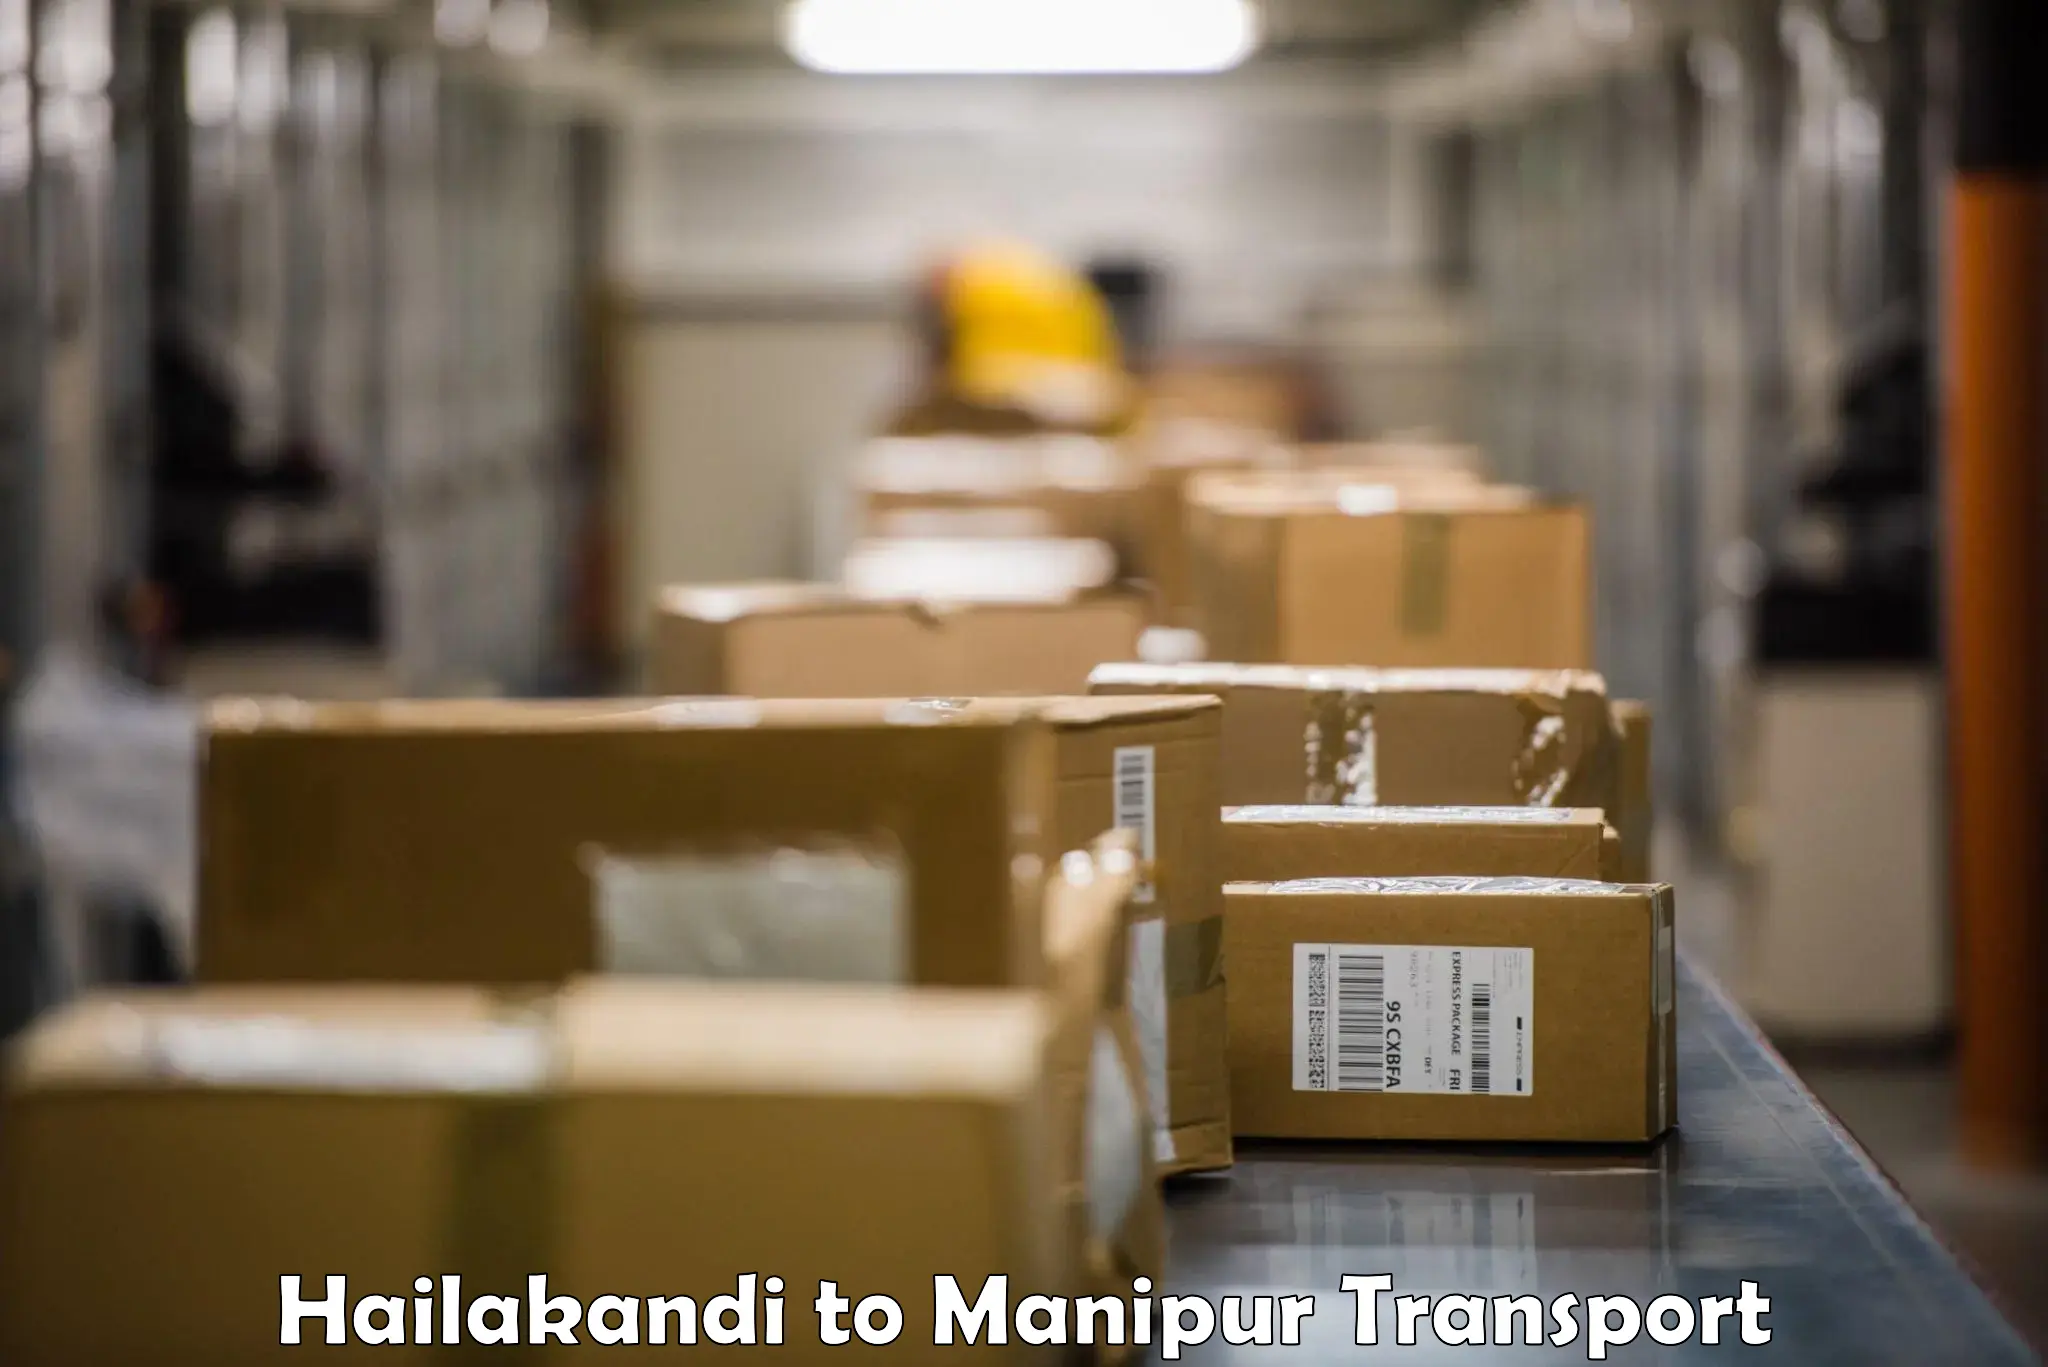 Truck transport companies in India Hailakandi to Imphal